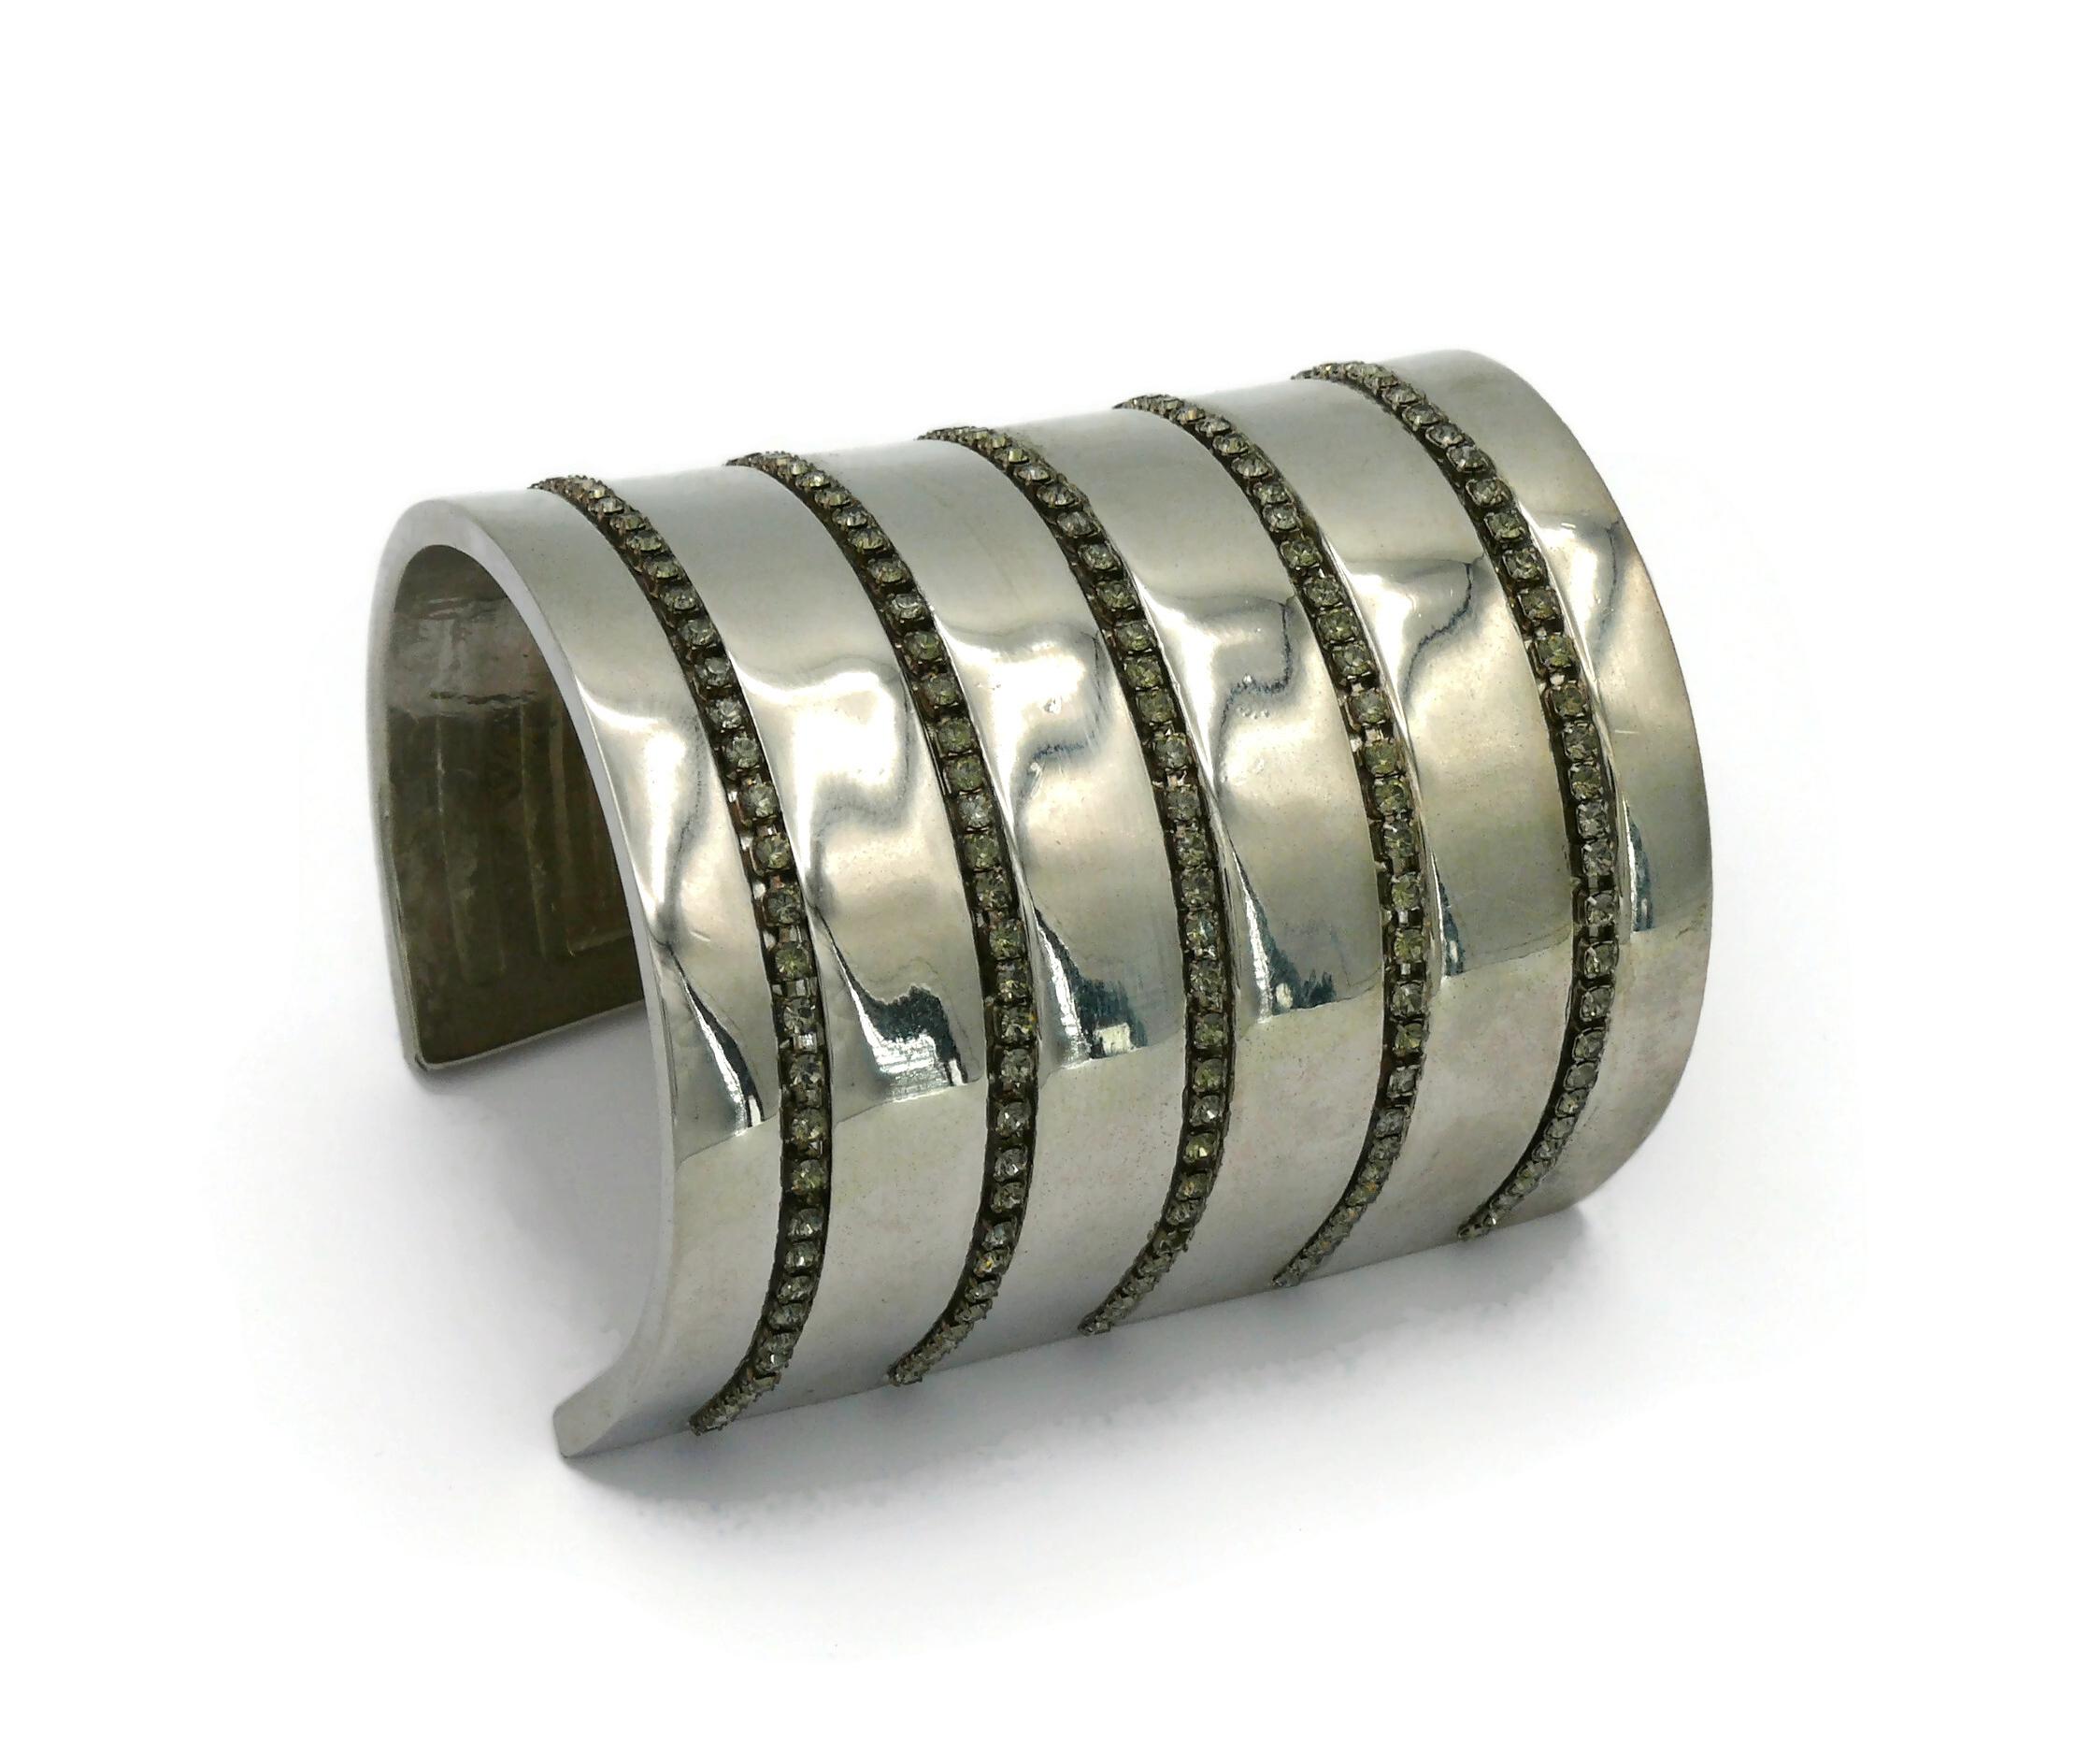 EDOUARD RAMBAUD Vintage Jewelled Silver Tone Cuff Bracelet In Good Condition For Sale In Nice, FR